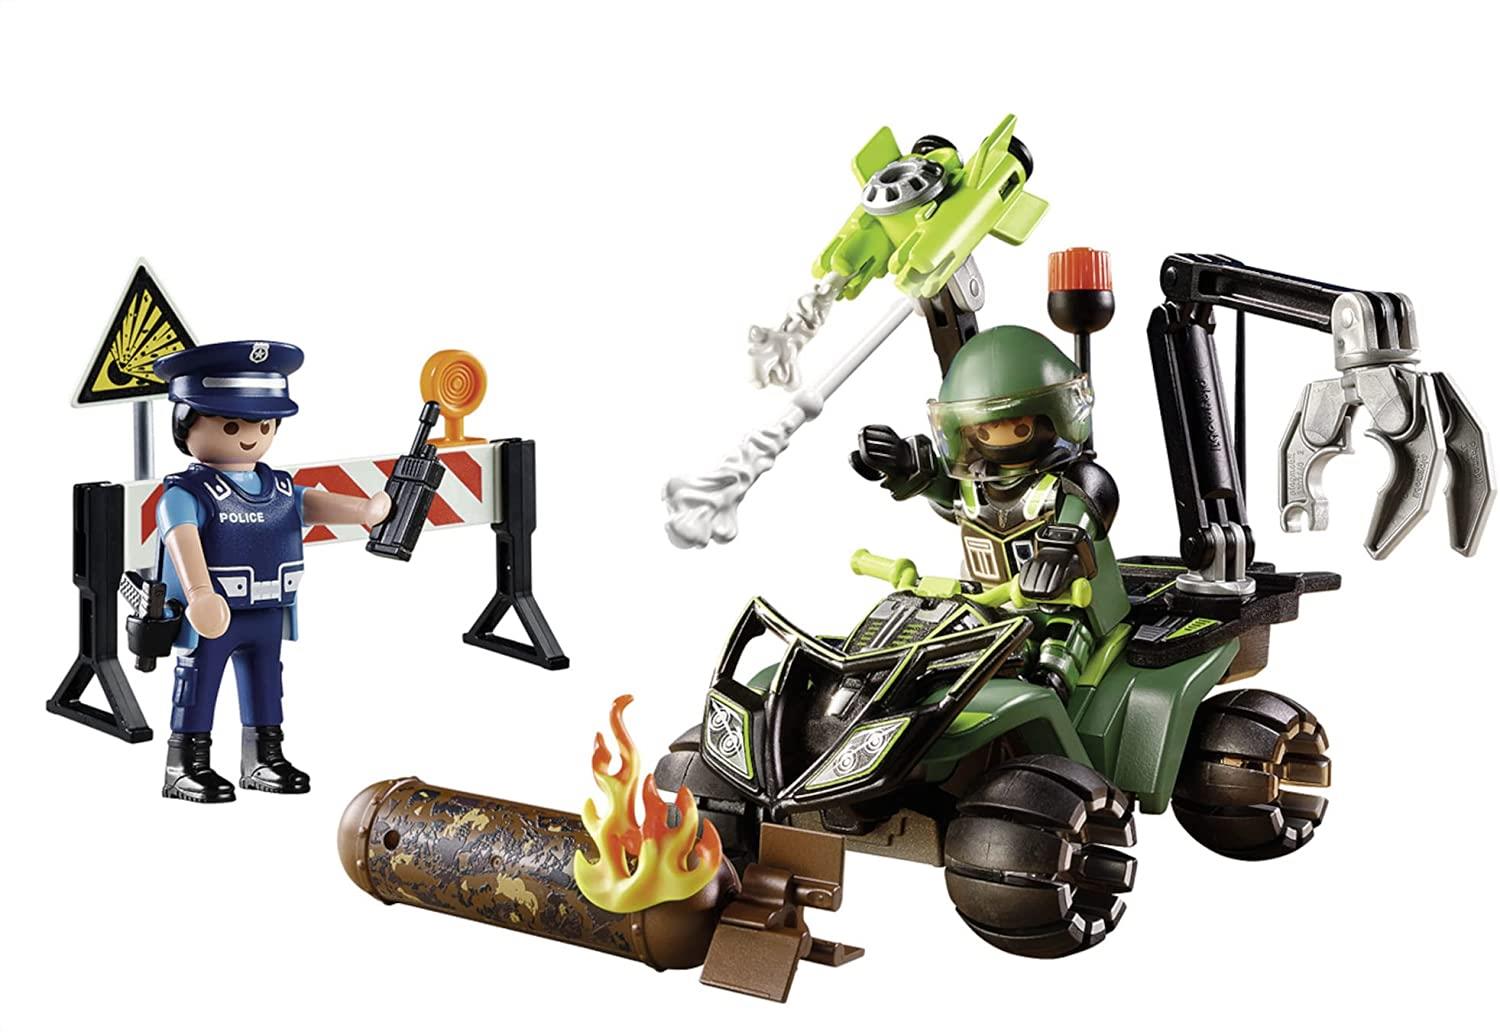 (BASHED) Playmobil City Action 70817 Starter Pack Police Training